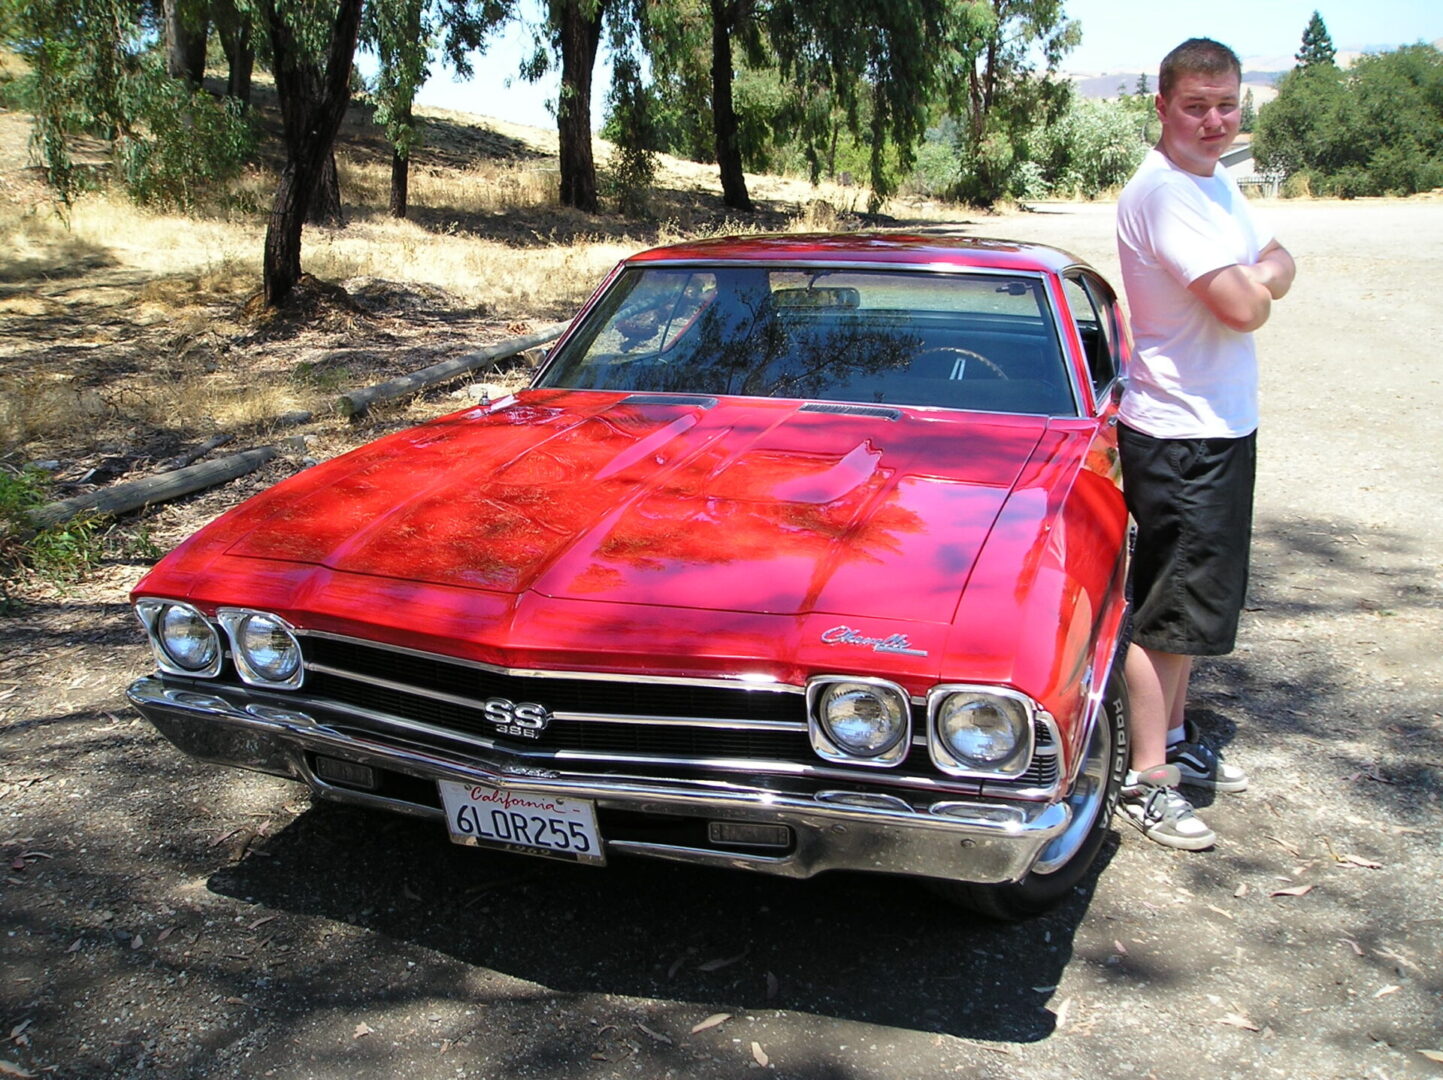 A man standing next to a red car.